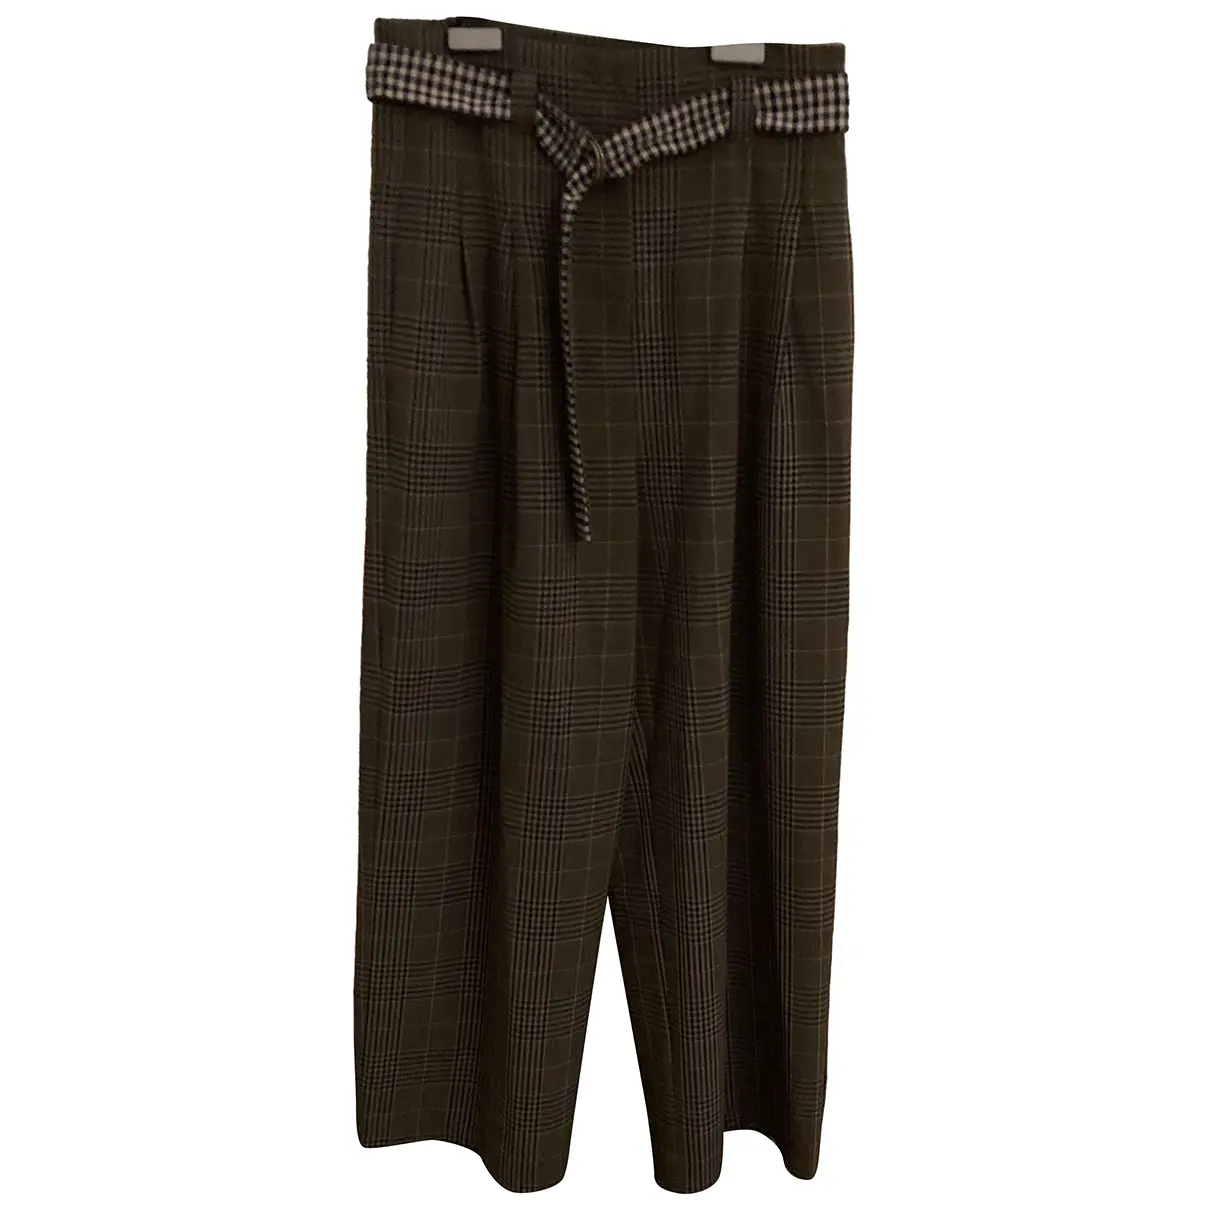 Large pants Semicouture